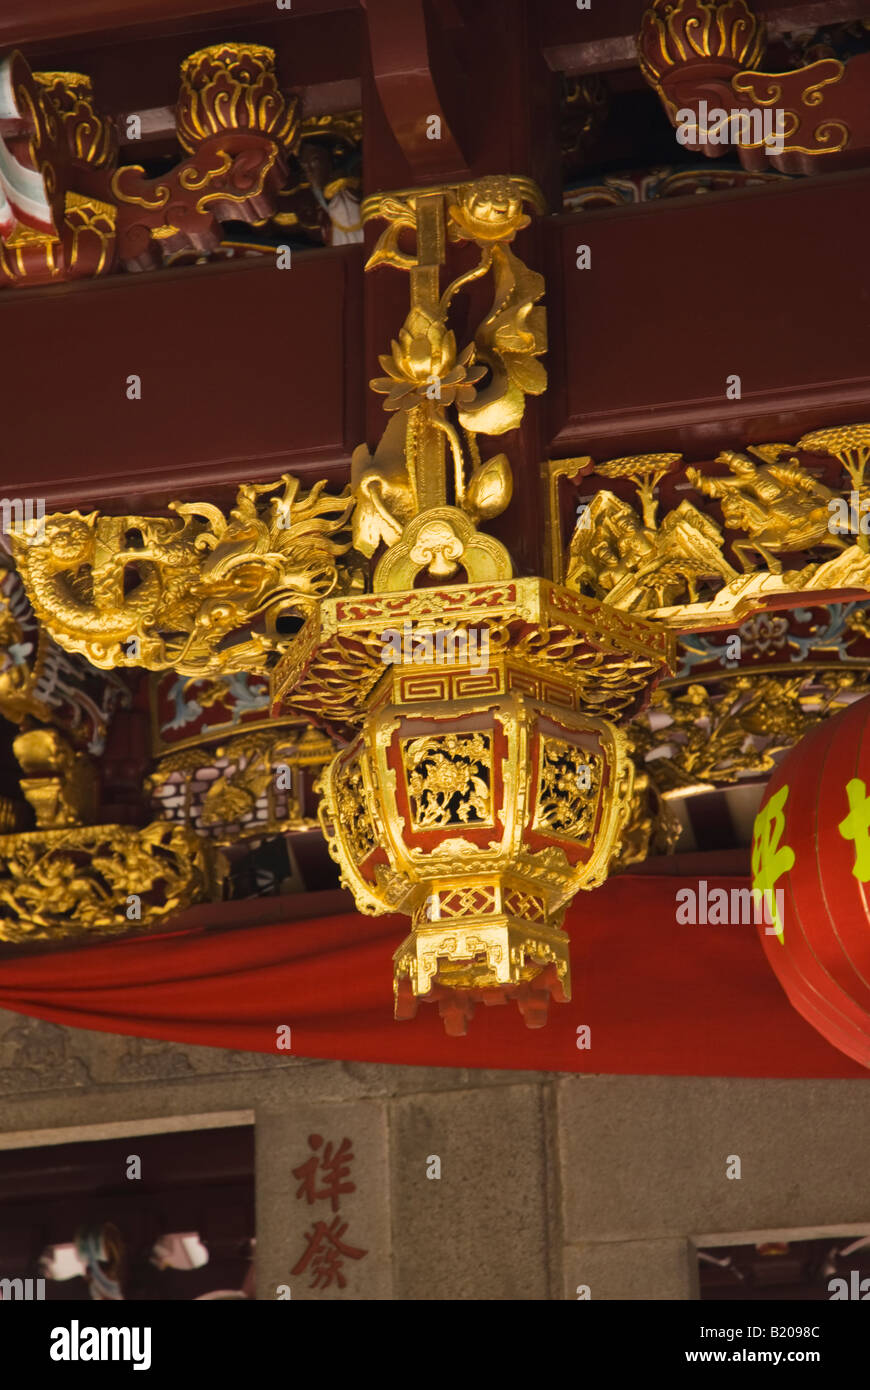 Artwork inside a Chinese Temple in Singapore Stock Photo